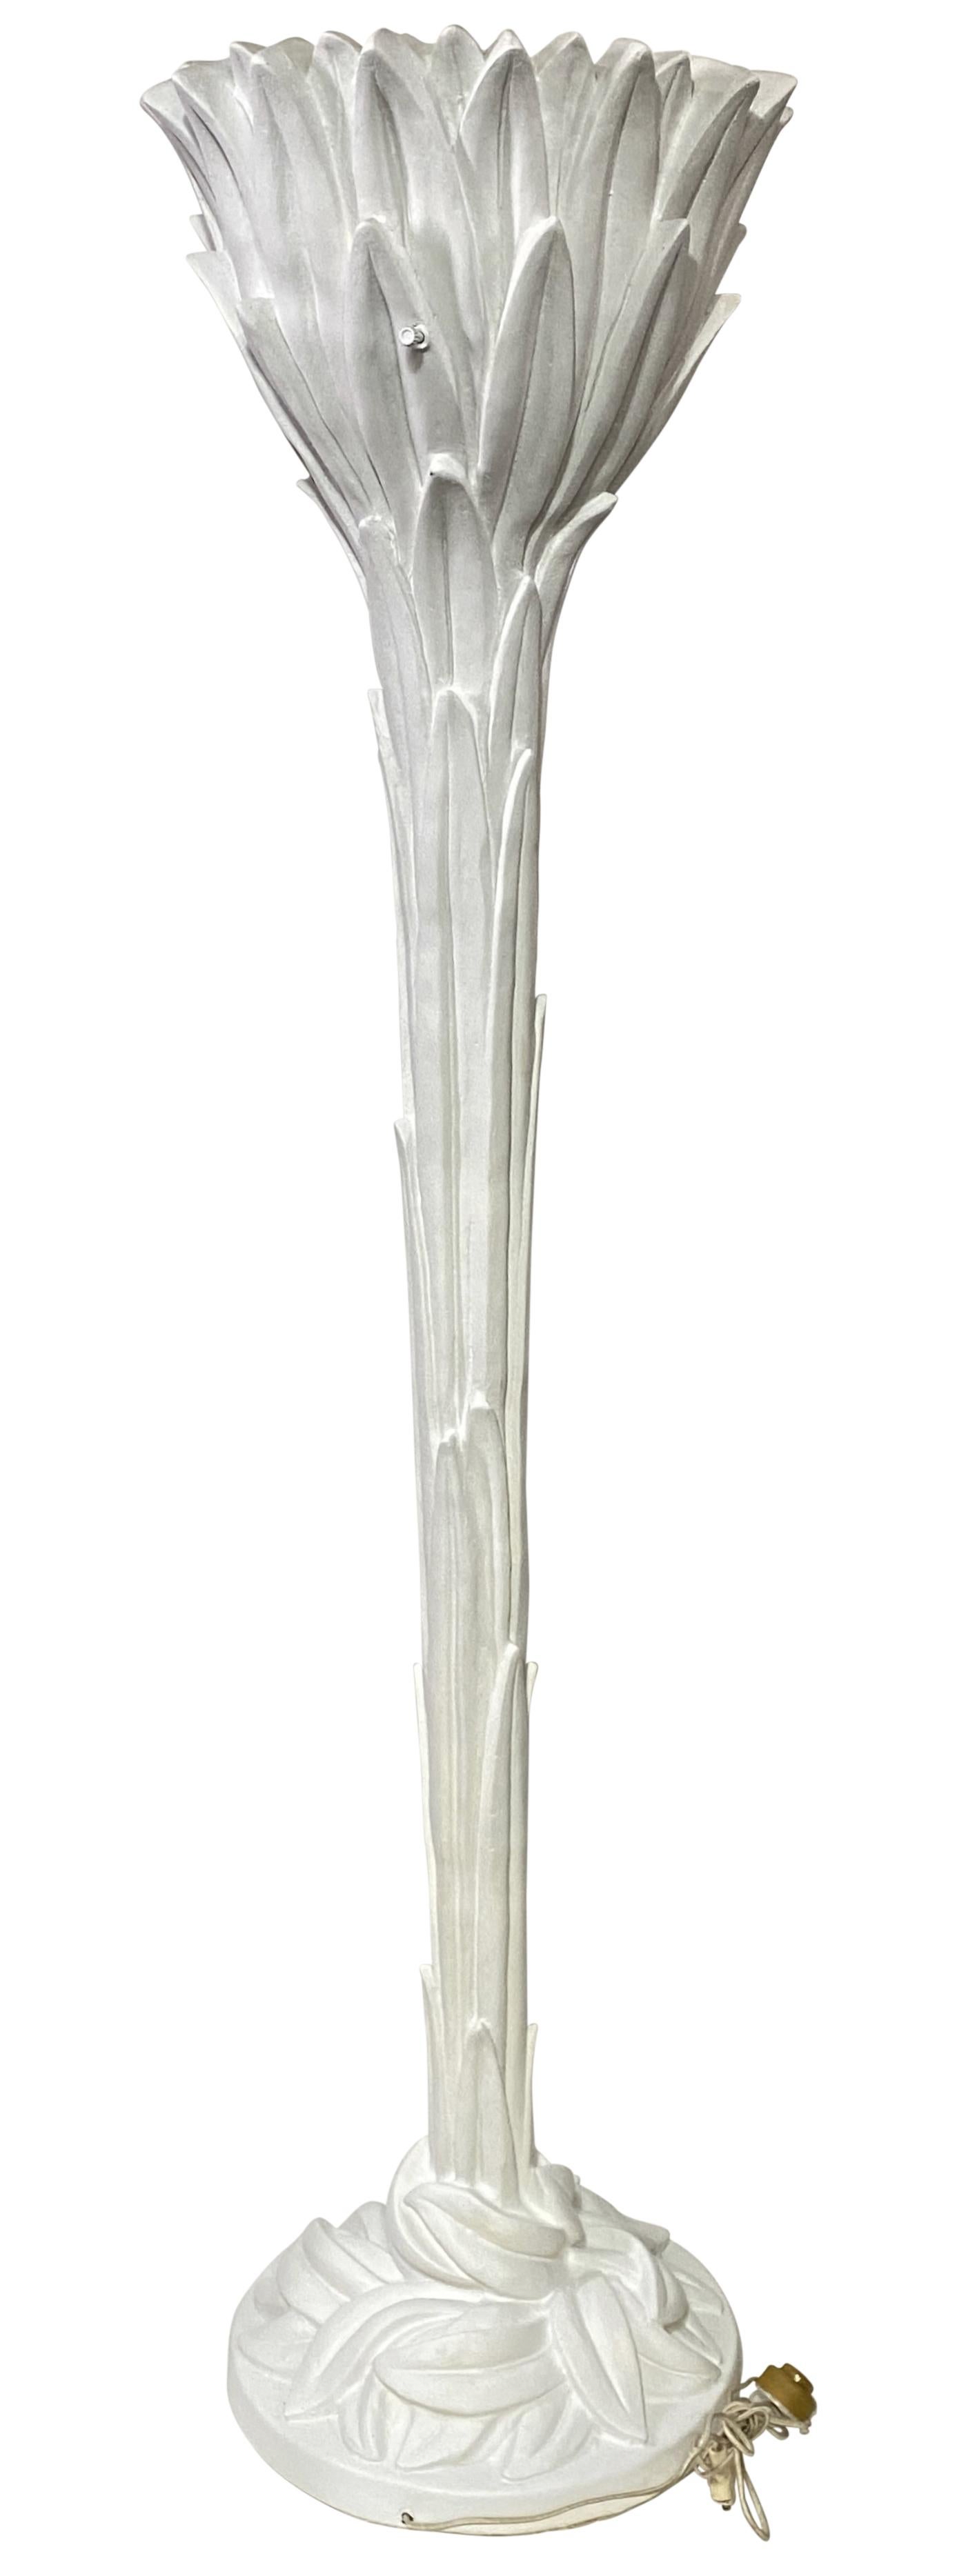 Iconic palm frond torchiere floor lamp after the design by famed French decorator Serge Roche. This tall and regal floor lamp exudes a tropical splendor with a twist of Baroque flare, which originally inspired Serge Roche's work. Heavily constructed